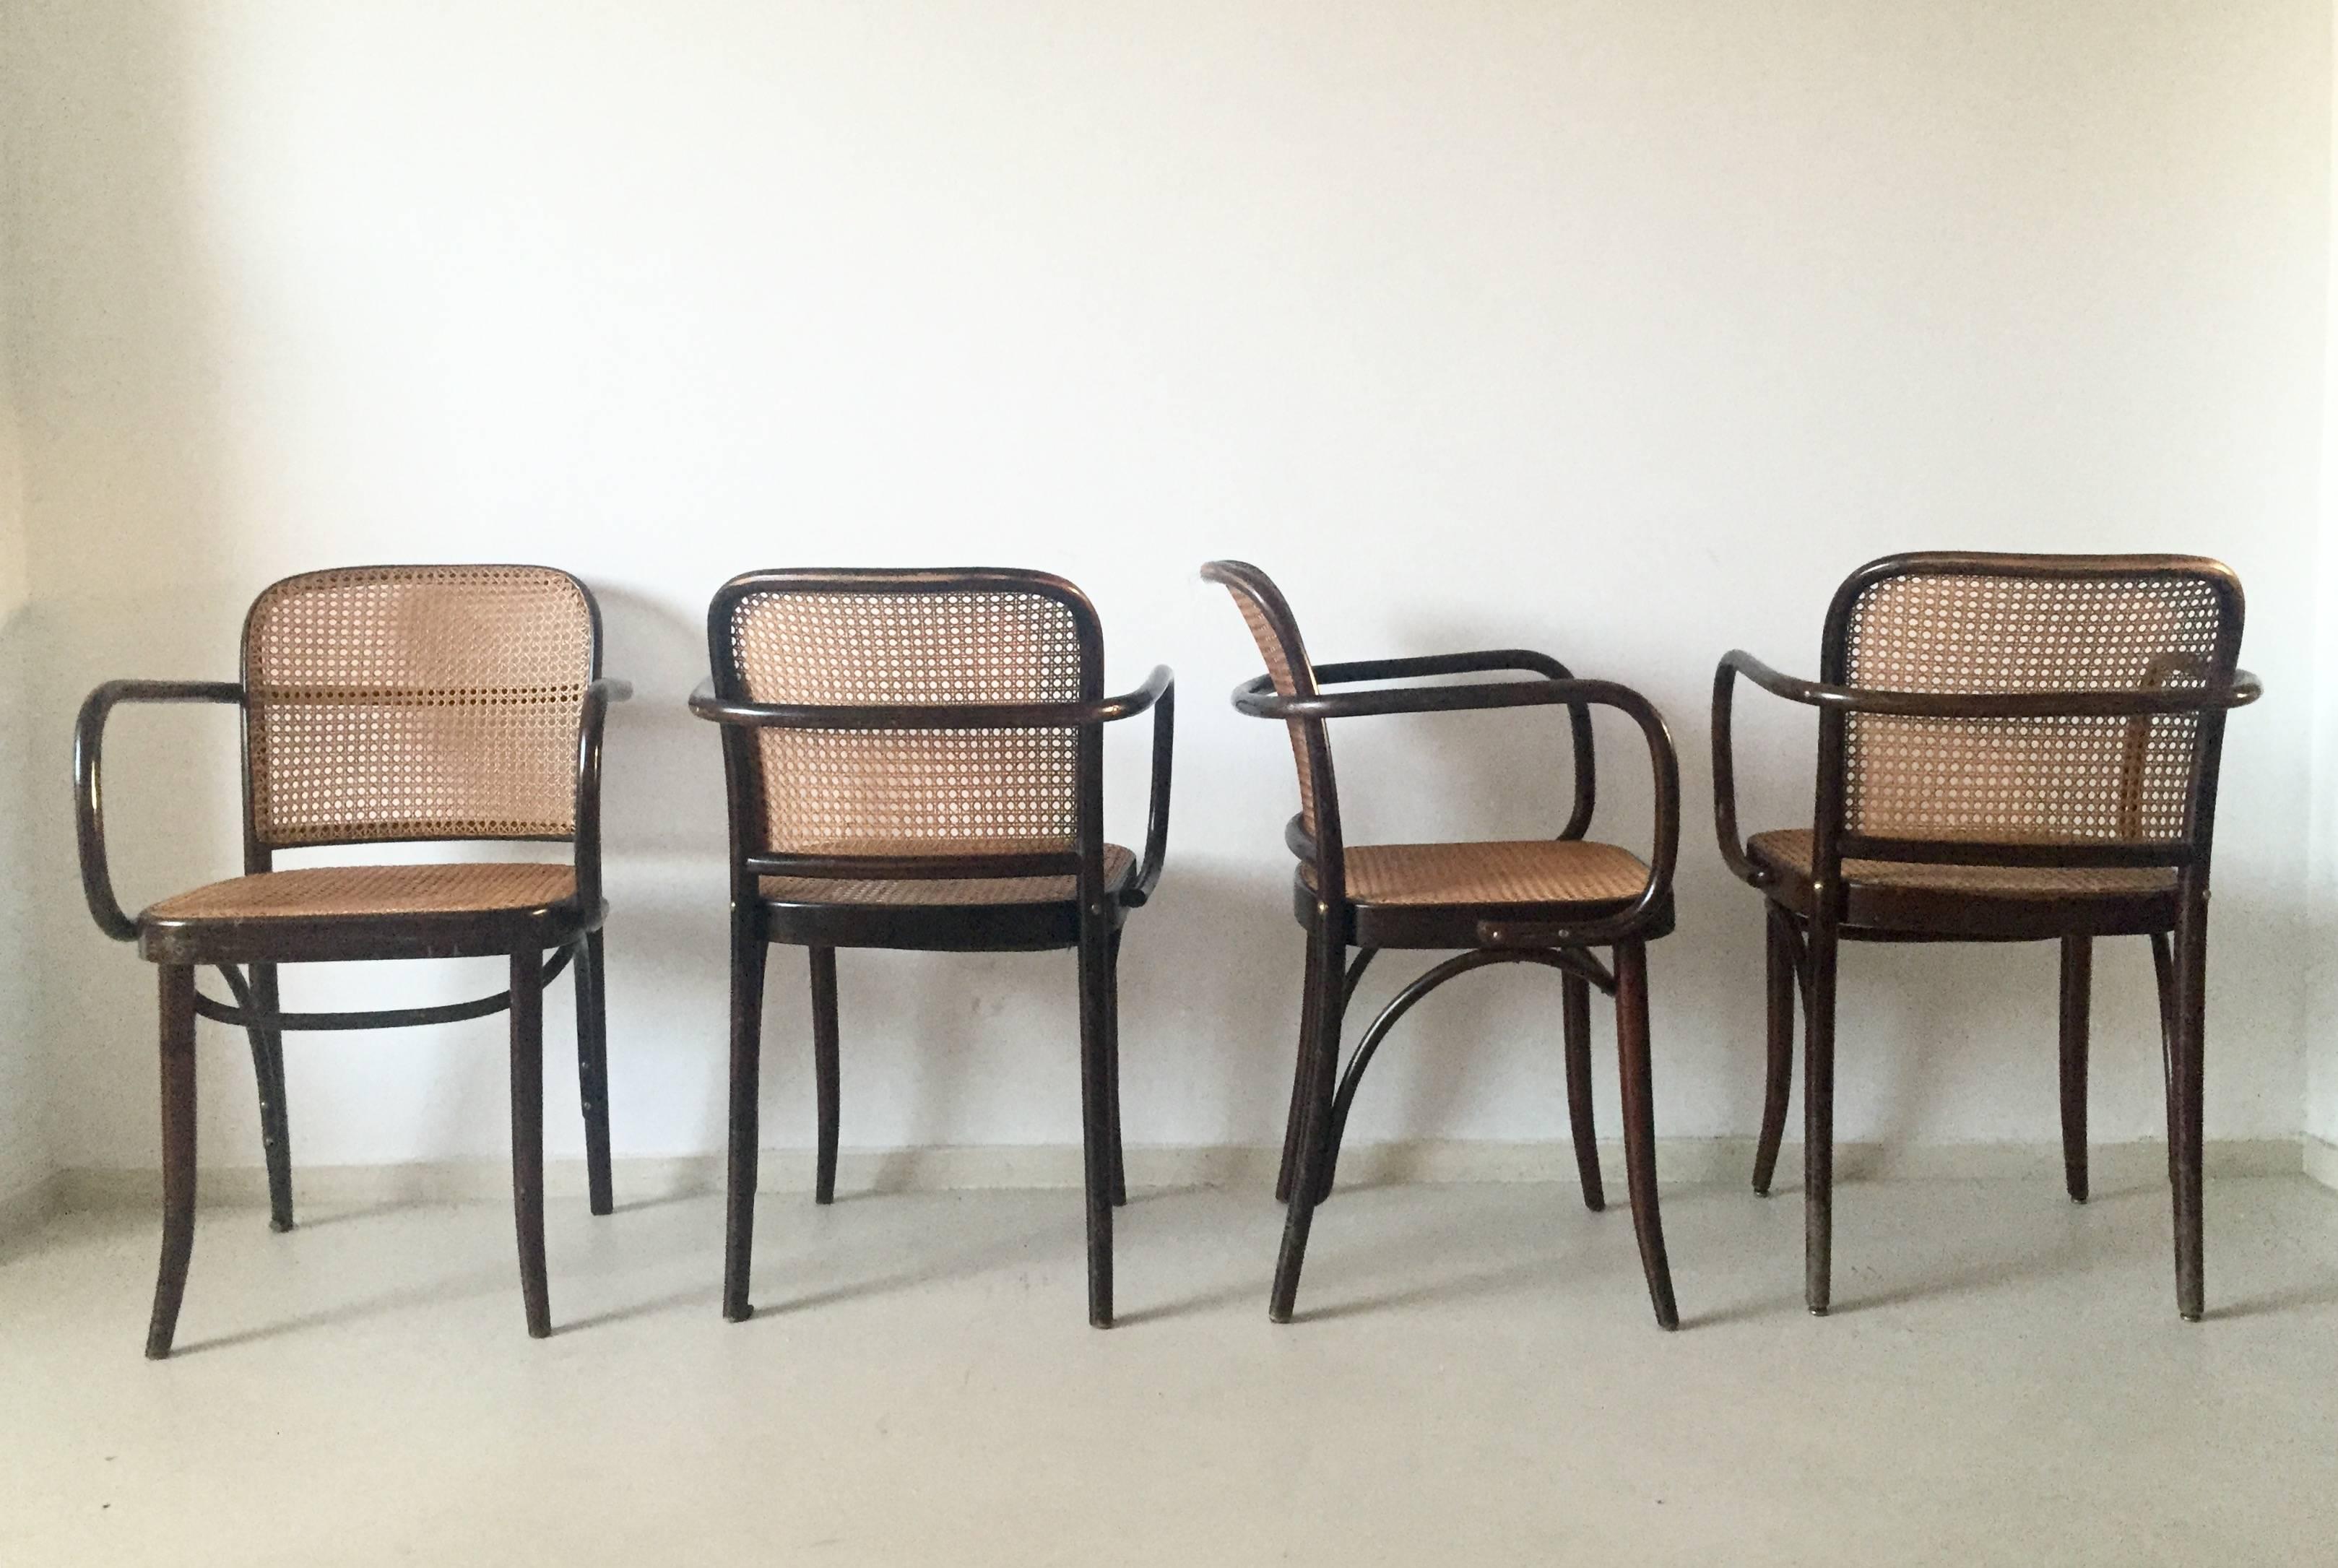 This set of four beautiful chairs is designed by Josef Hoffman and produced in Czechoslovakia, circa 1960s. They feature a bentwood frame and a cane seat and back.

They remain in a good vintage condition with minimal signs of age and use.